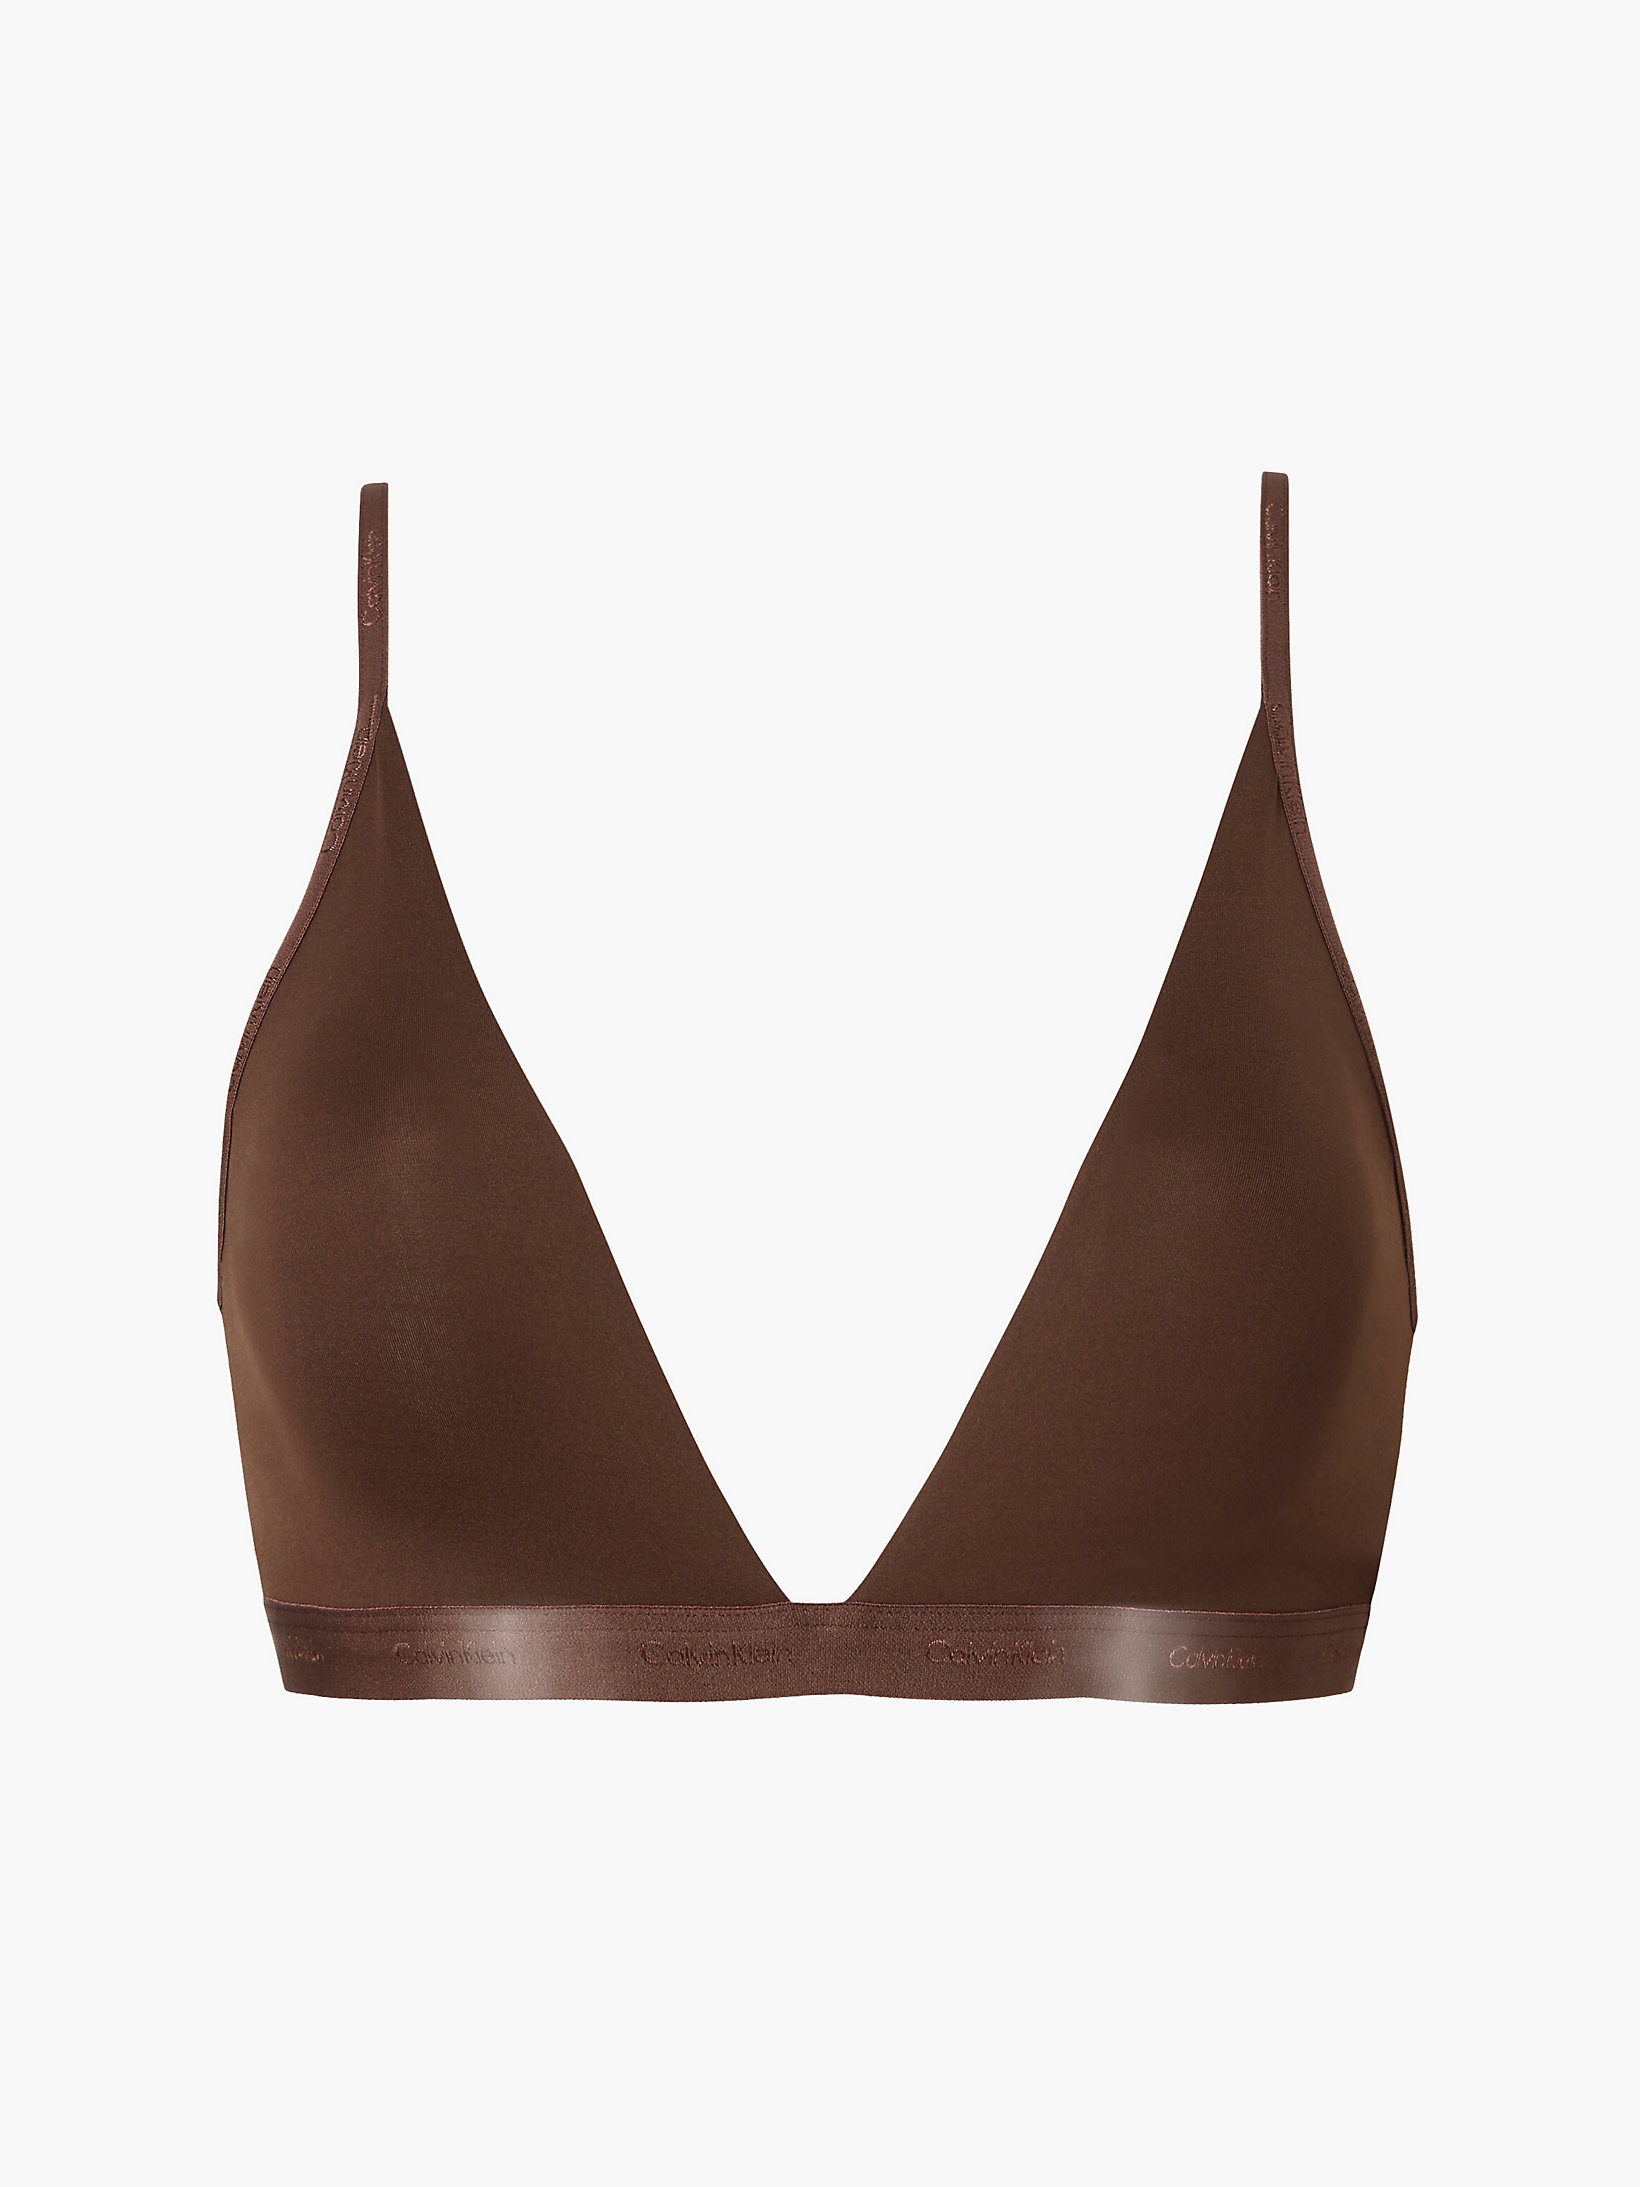 Soutien-Gorge Triangle - Form To Body > Umber > undefined femmes > Calvin Klein